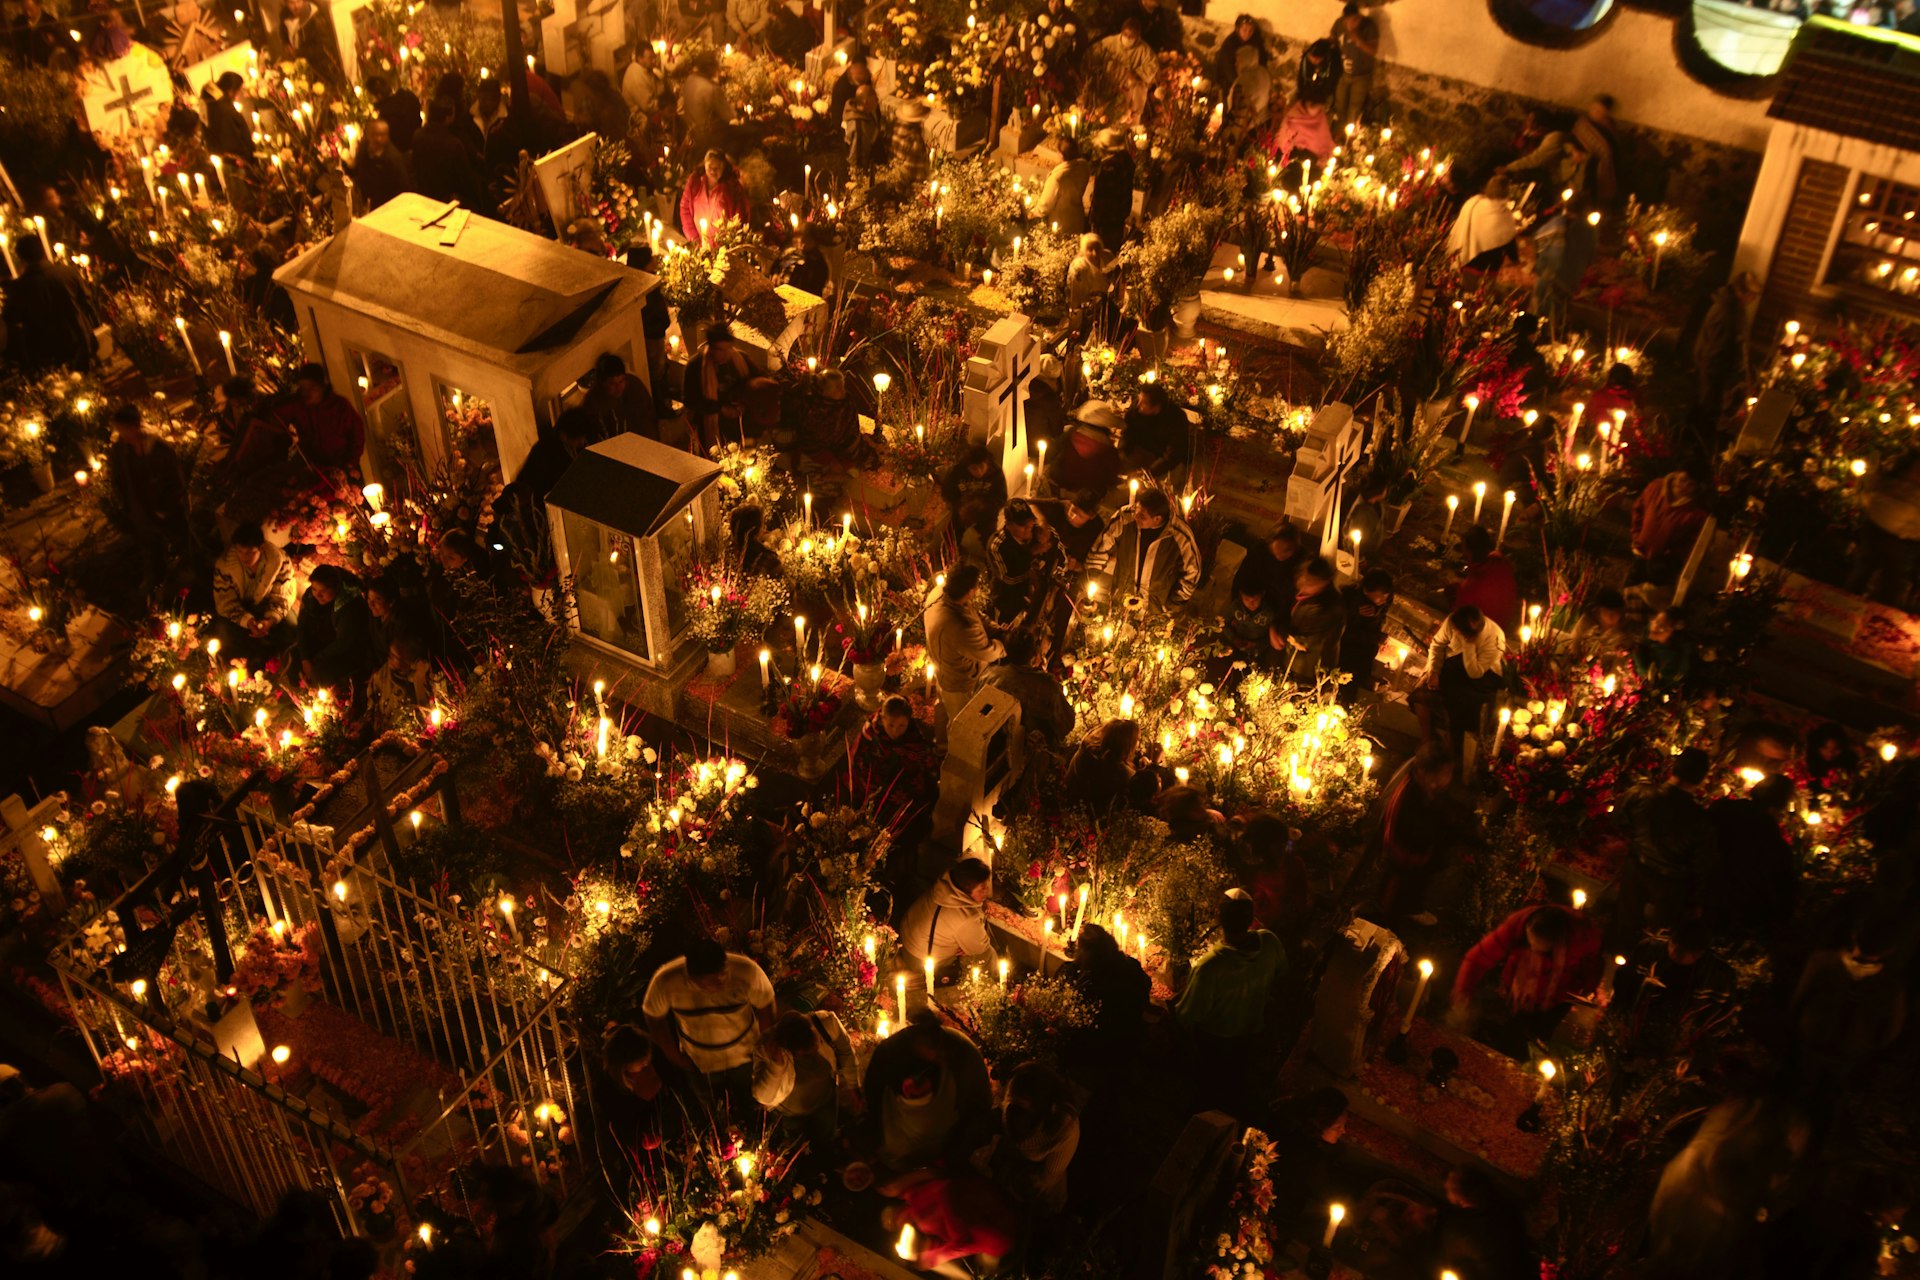 Illuminated by candles, crowds gather for commemorations during the Day of the Dead at the Church of San Andres Apostol cemetery, Mexico